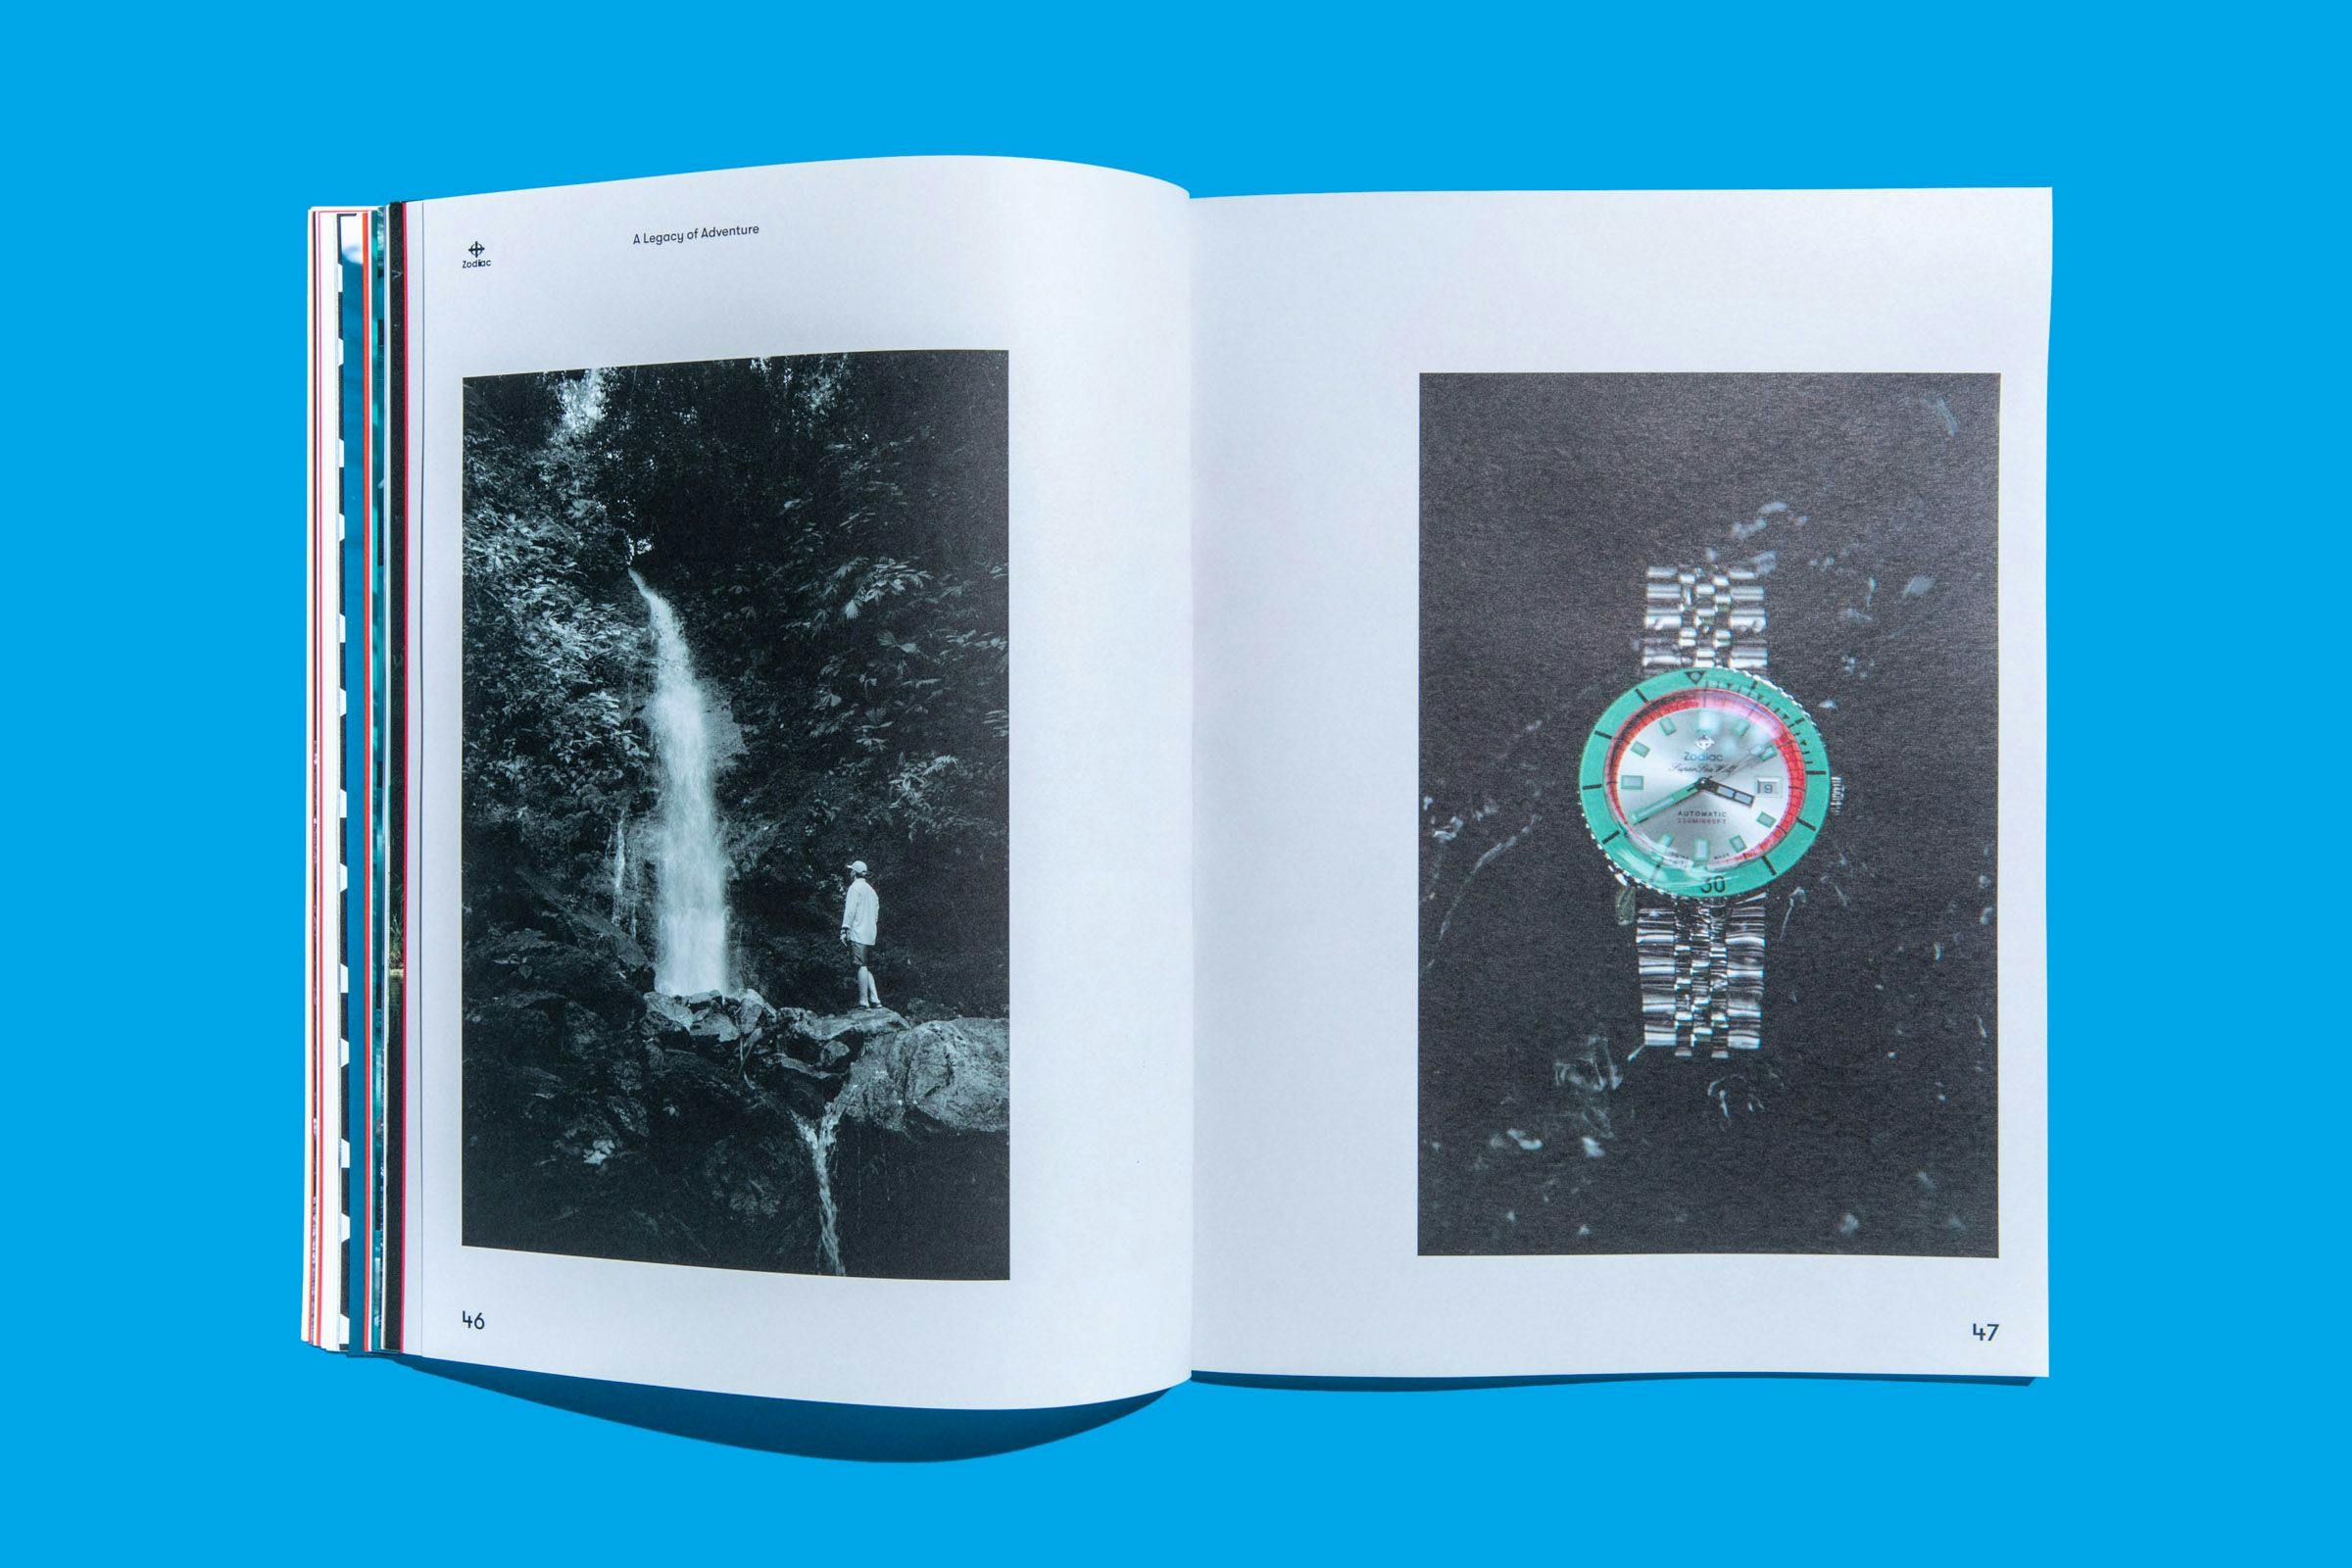 Pages from the Zodiac Watches: Brand Book showing nature and a Zodiac Watch